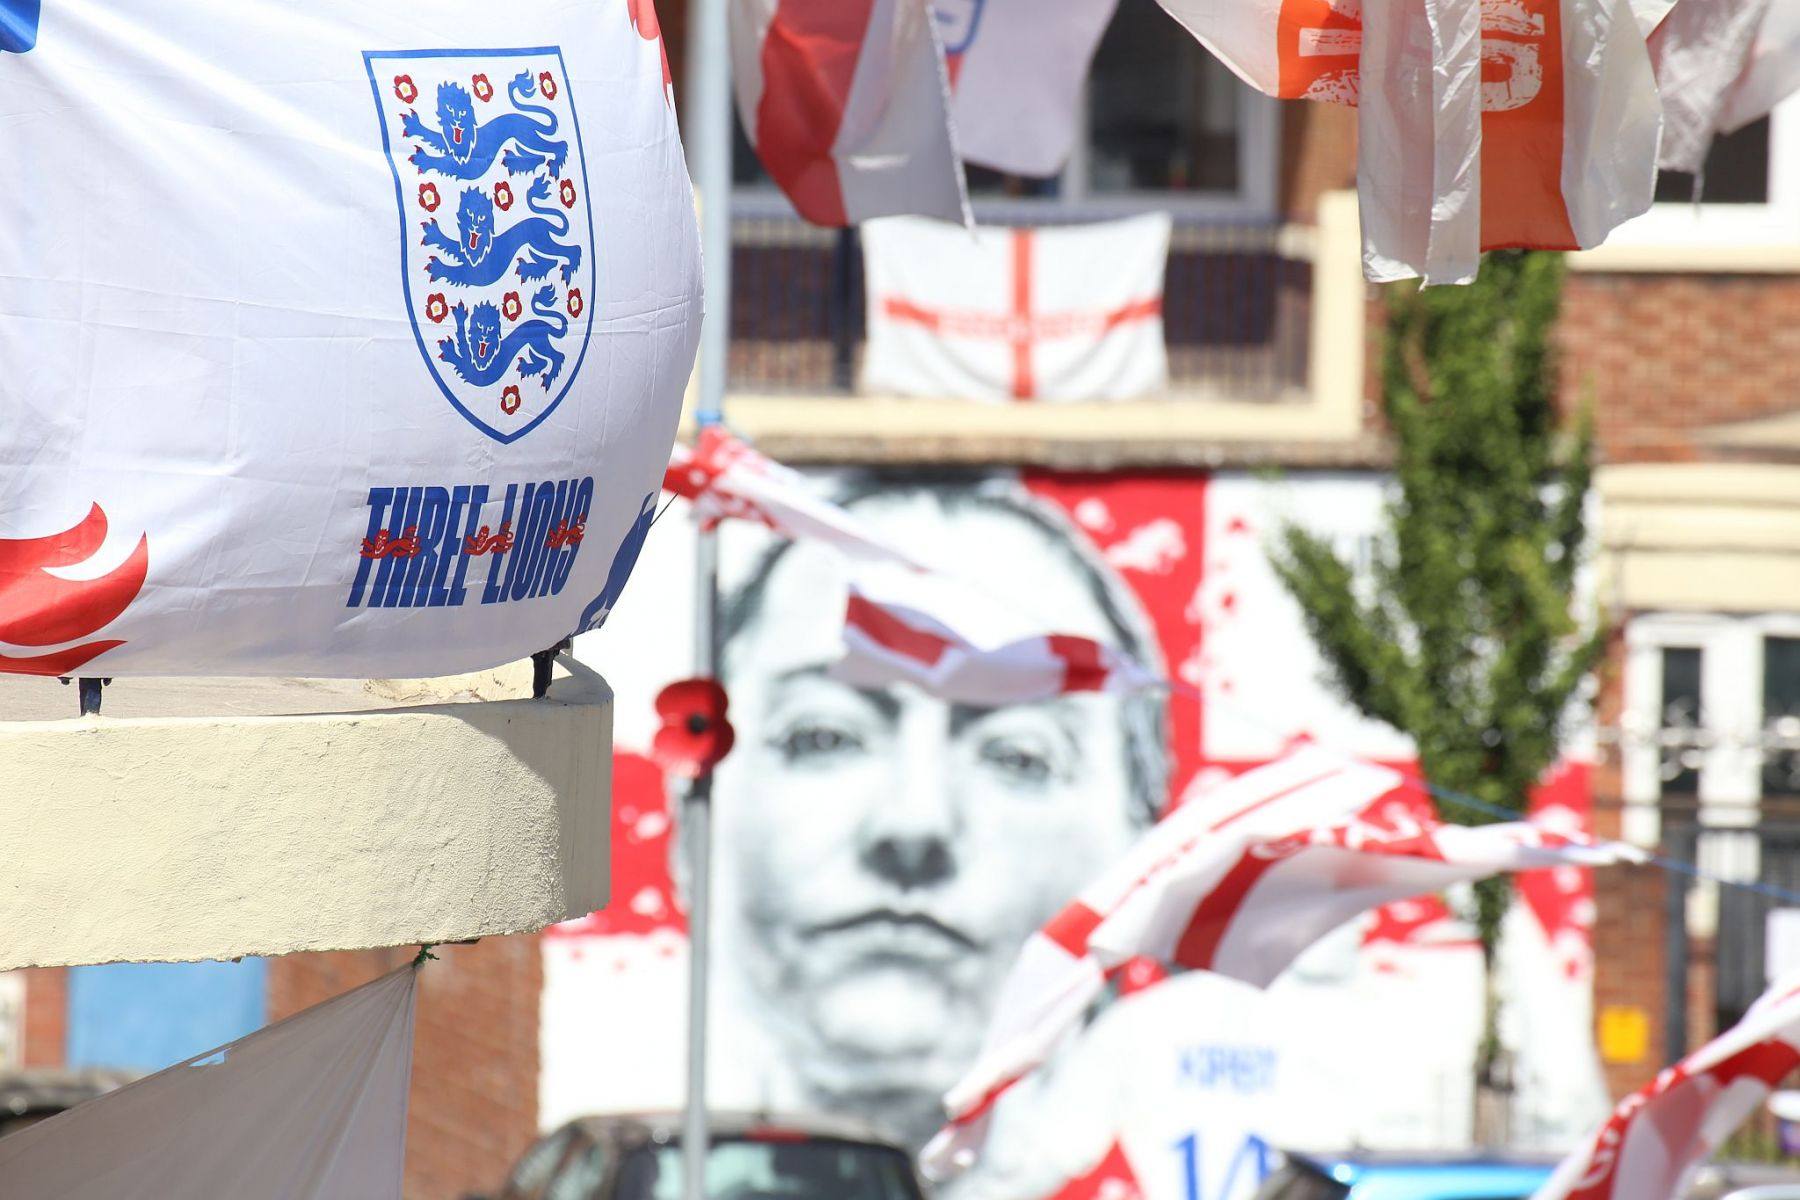 Spray painted mural of footballer Fran Kirby at the Kirby Estate (Bermondsey SE London) seen through England flags flying from the flat's balconies